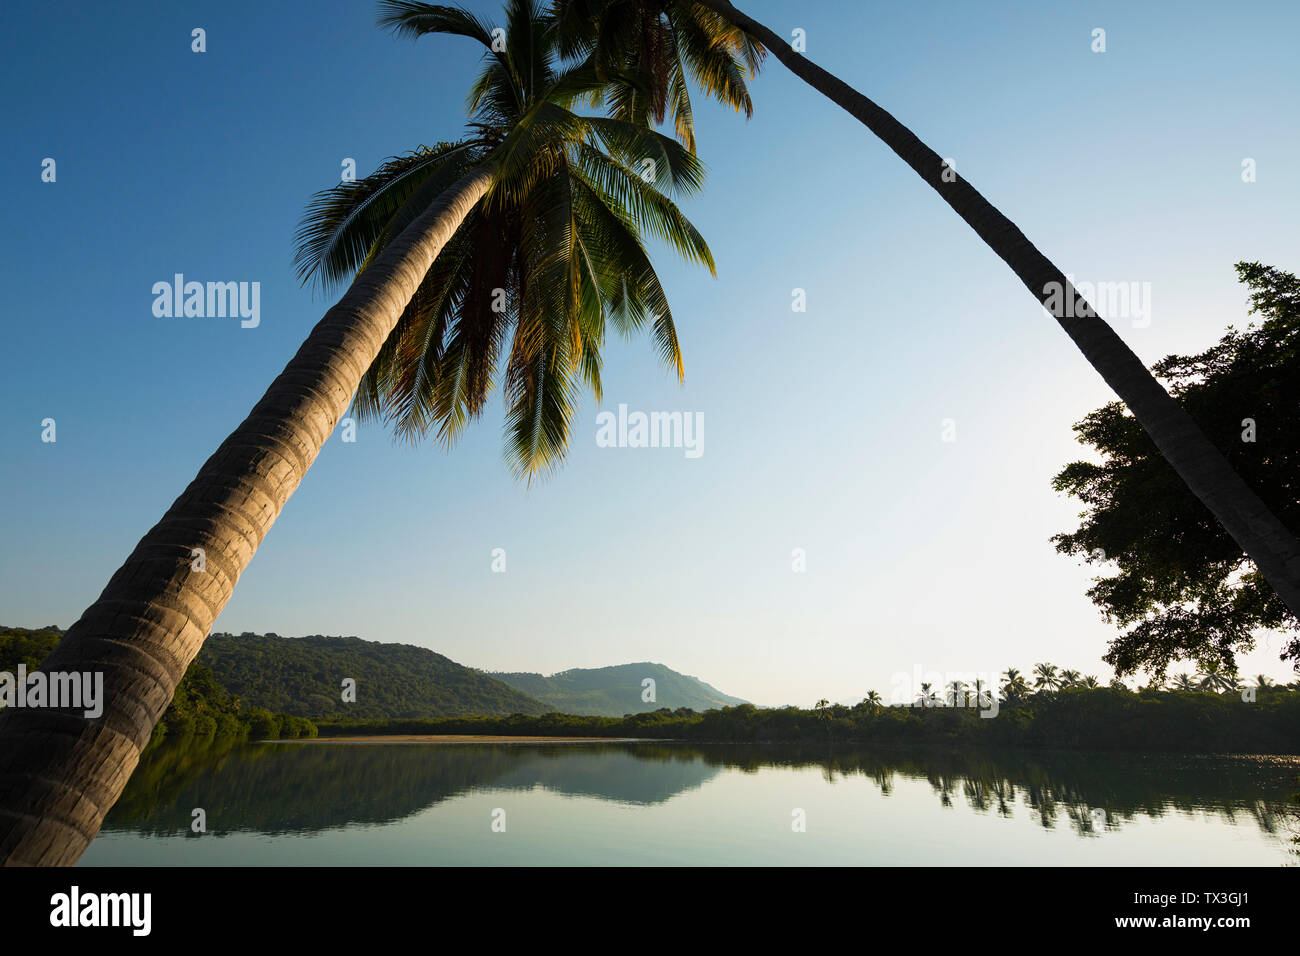 Palm trees leaning over tranquil, placid tropical river, Platinitos, Nayarit, Mexico Stock Photo